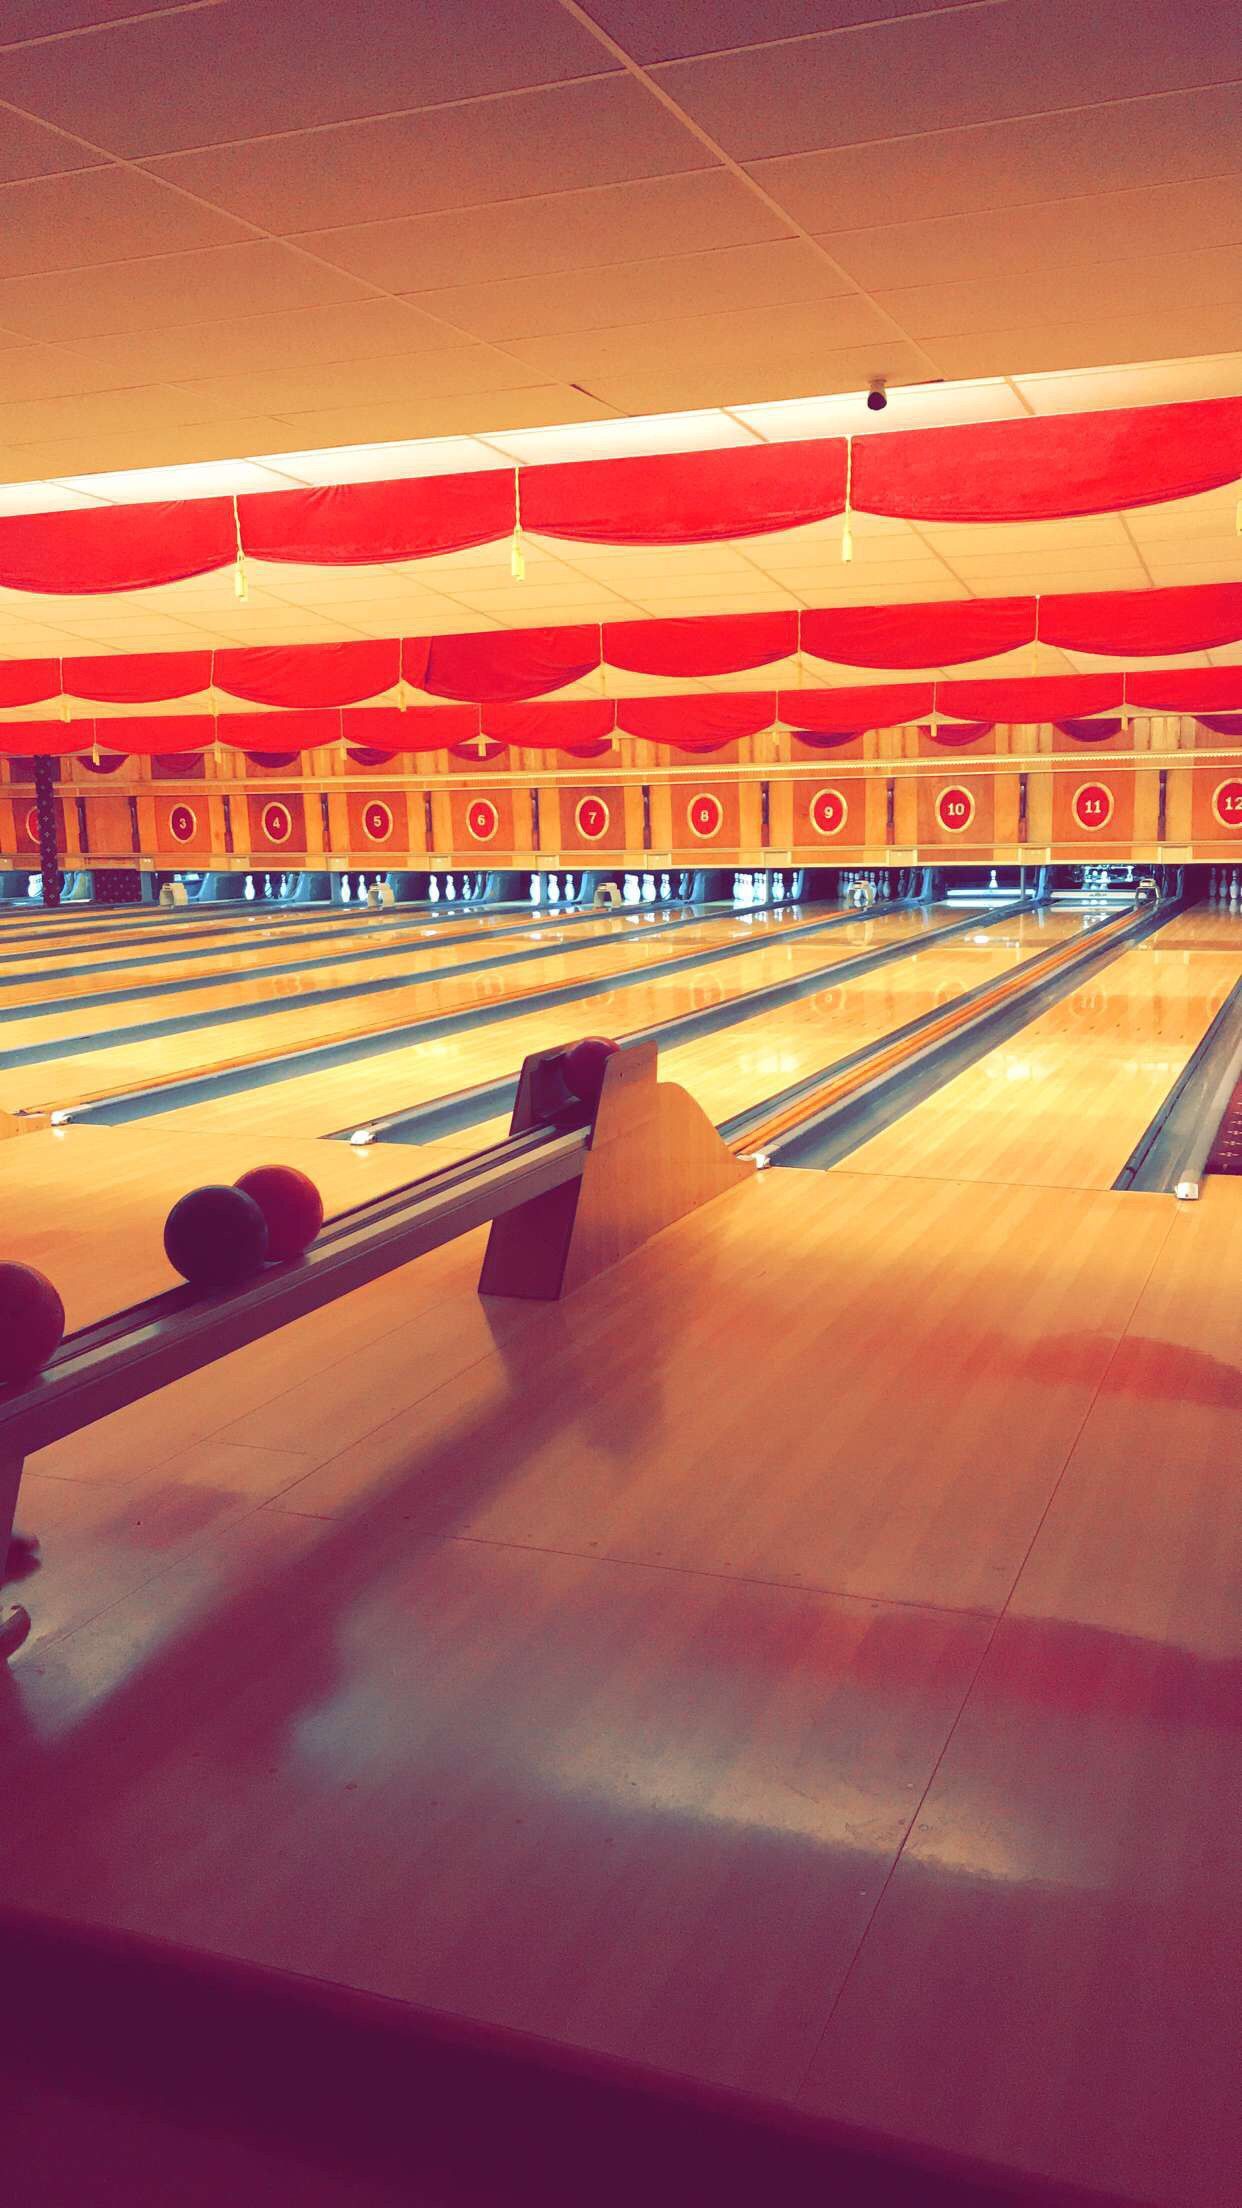 Bowling alley. Bowling alley, Phone wallpaper, Bowling